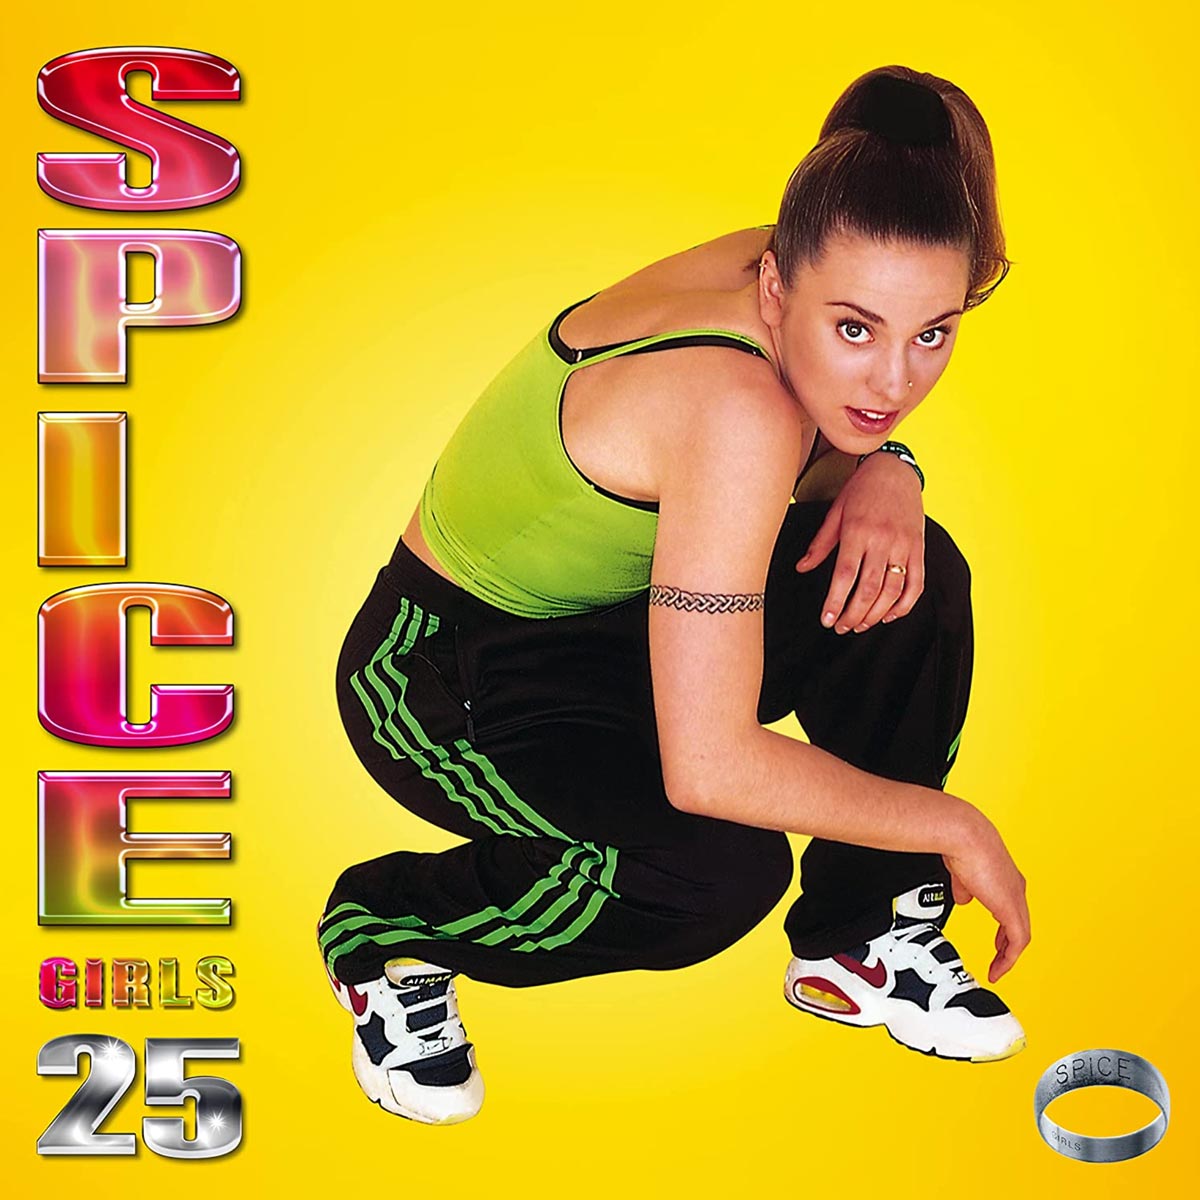 Spice Girls - Spice (25th Anniversary Sporty Yellow) - LP